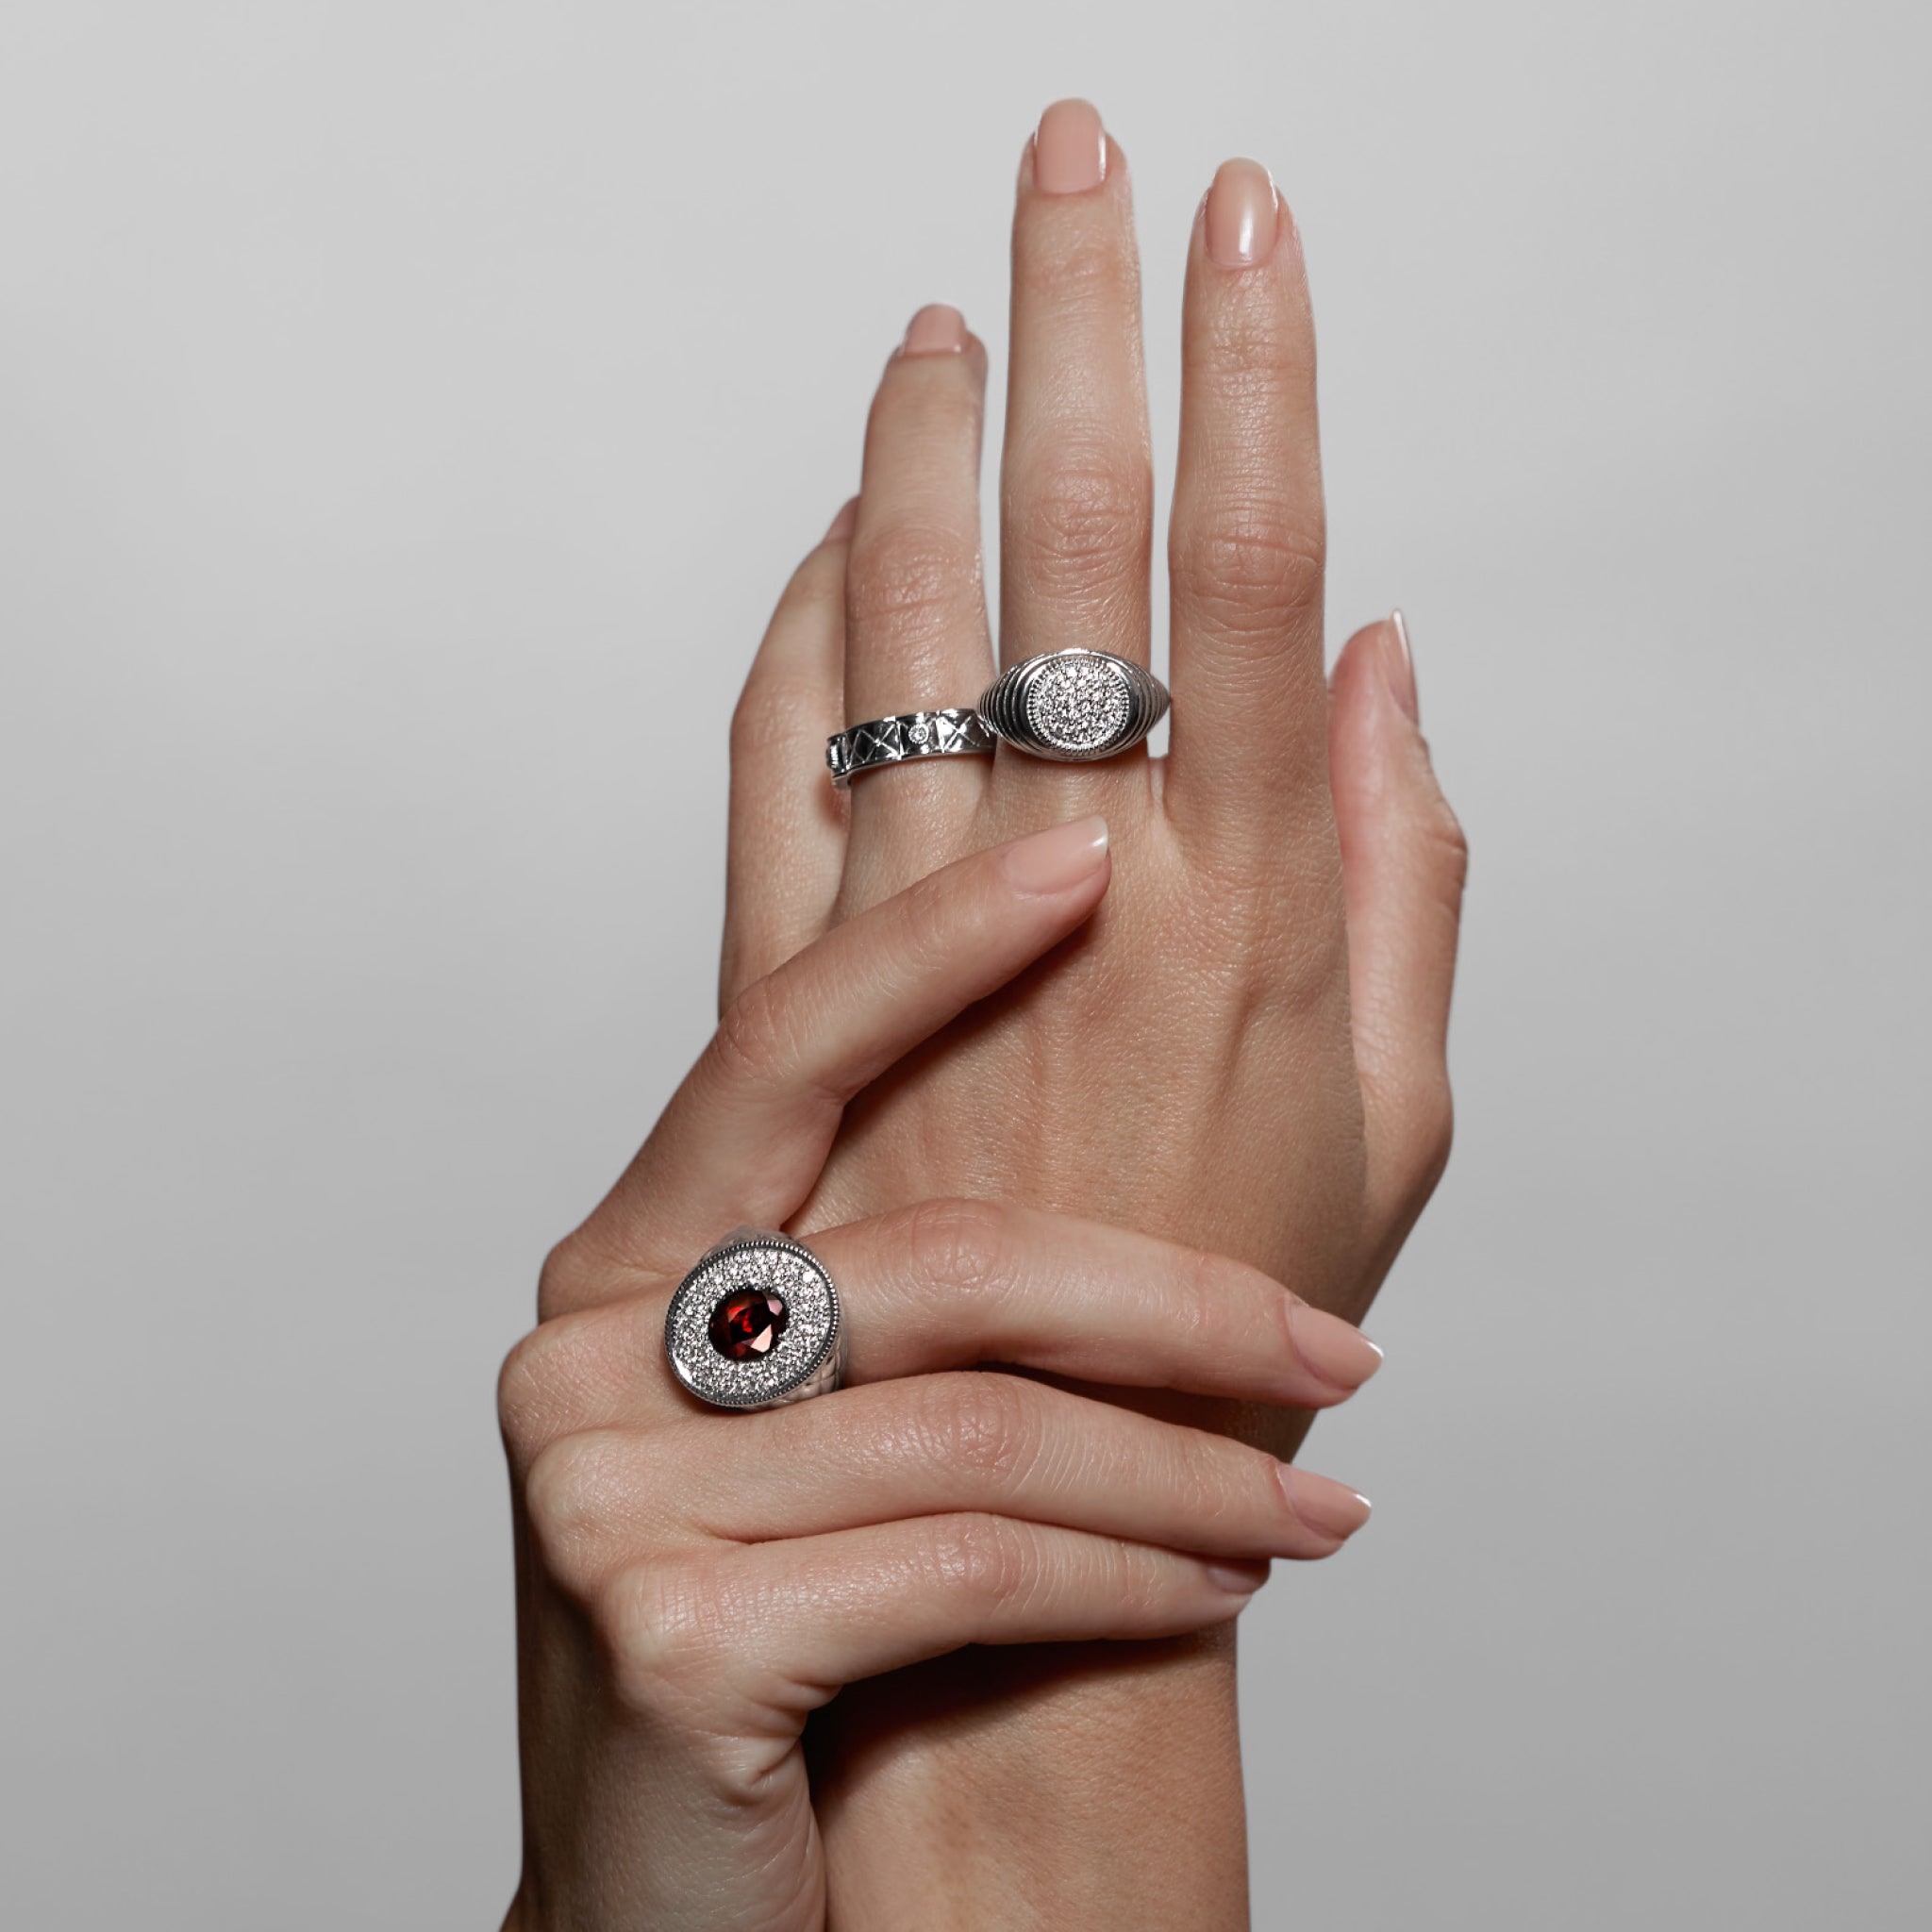 Max Oval Ring with Garnet and Diamonds